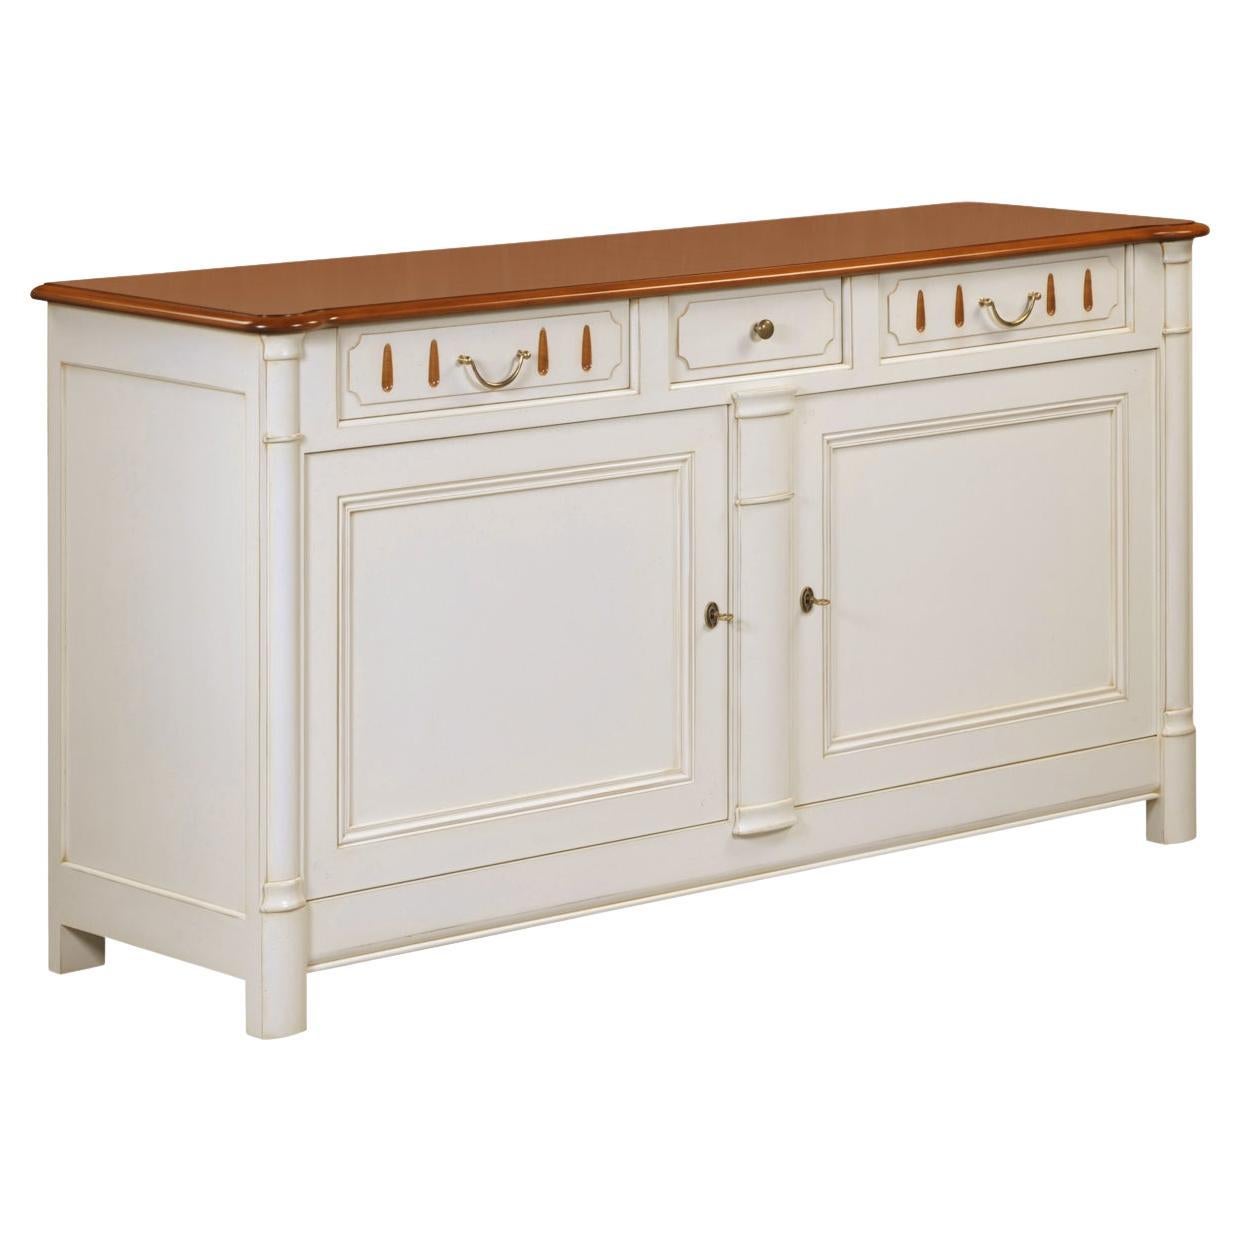 French Tradition 2-Door Buffet in Cherry, 3 Drawers and White-Cream Lacquered